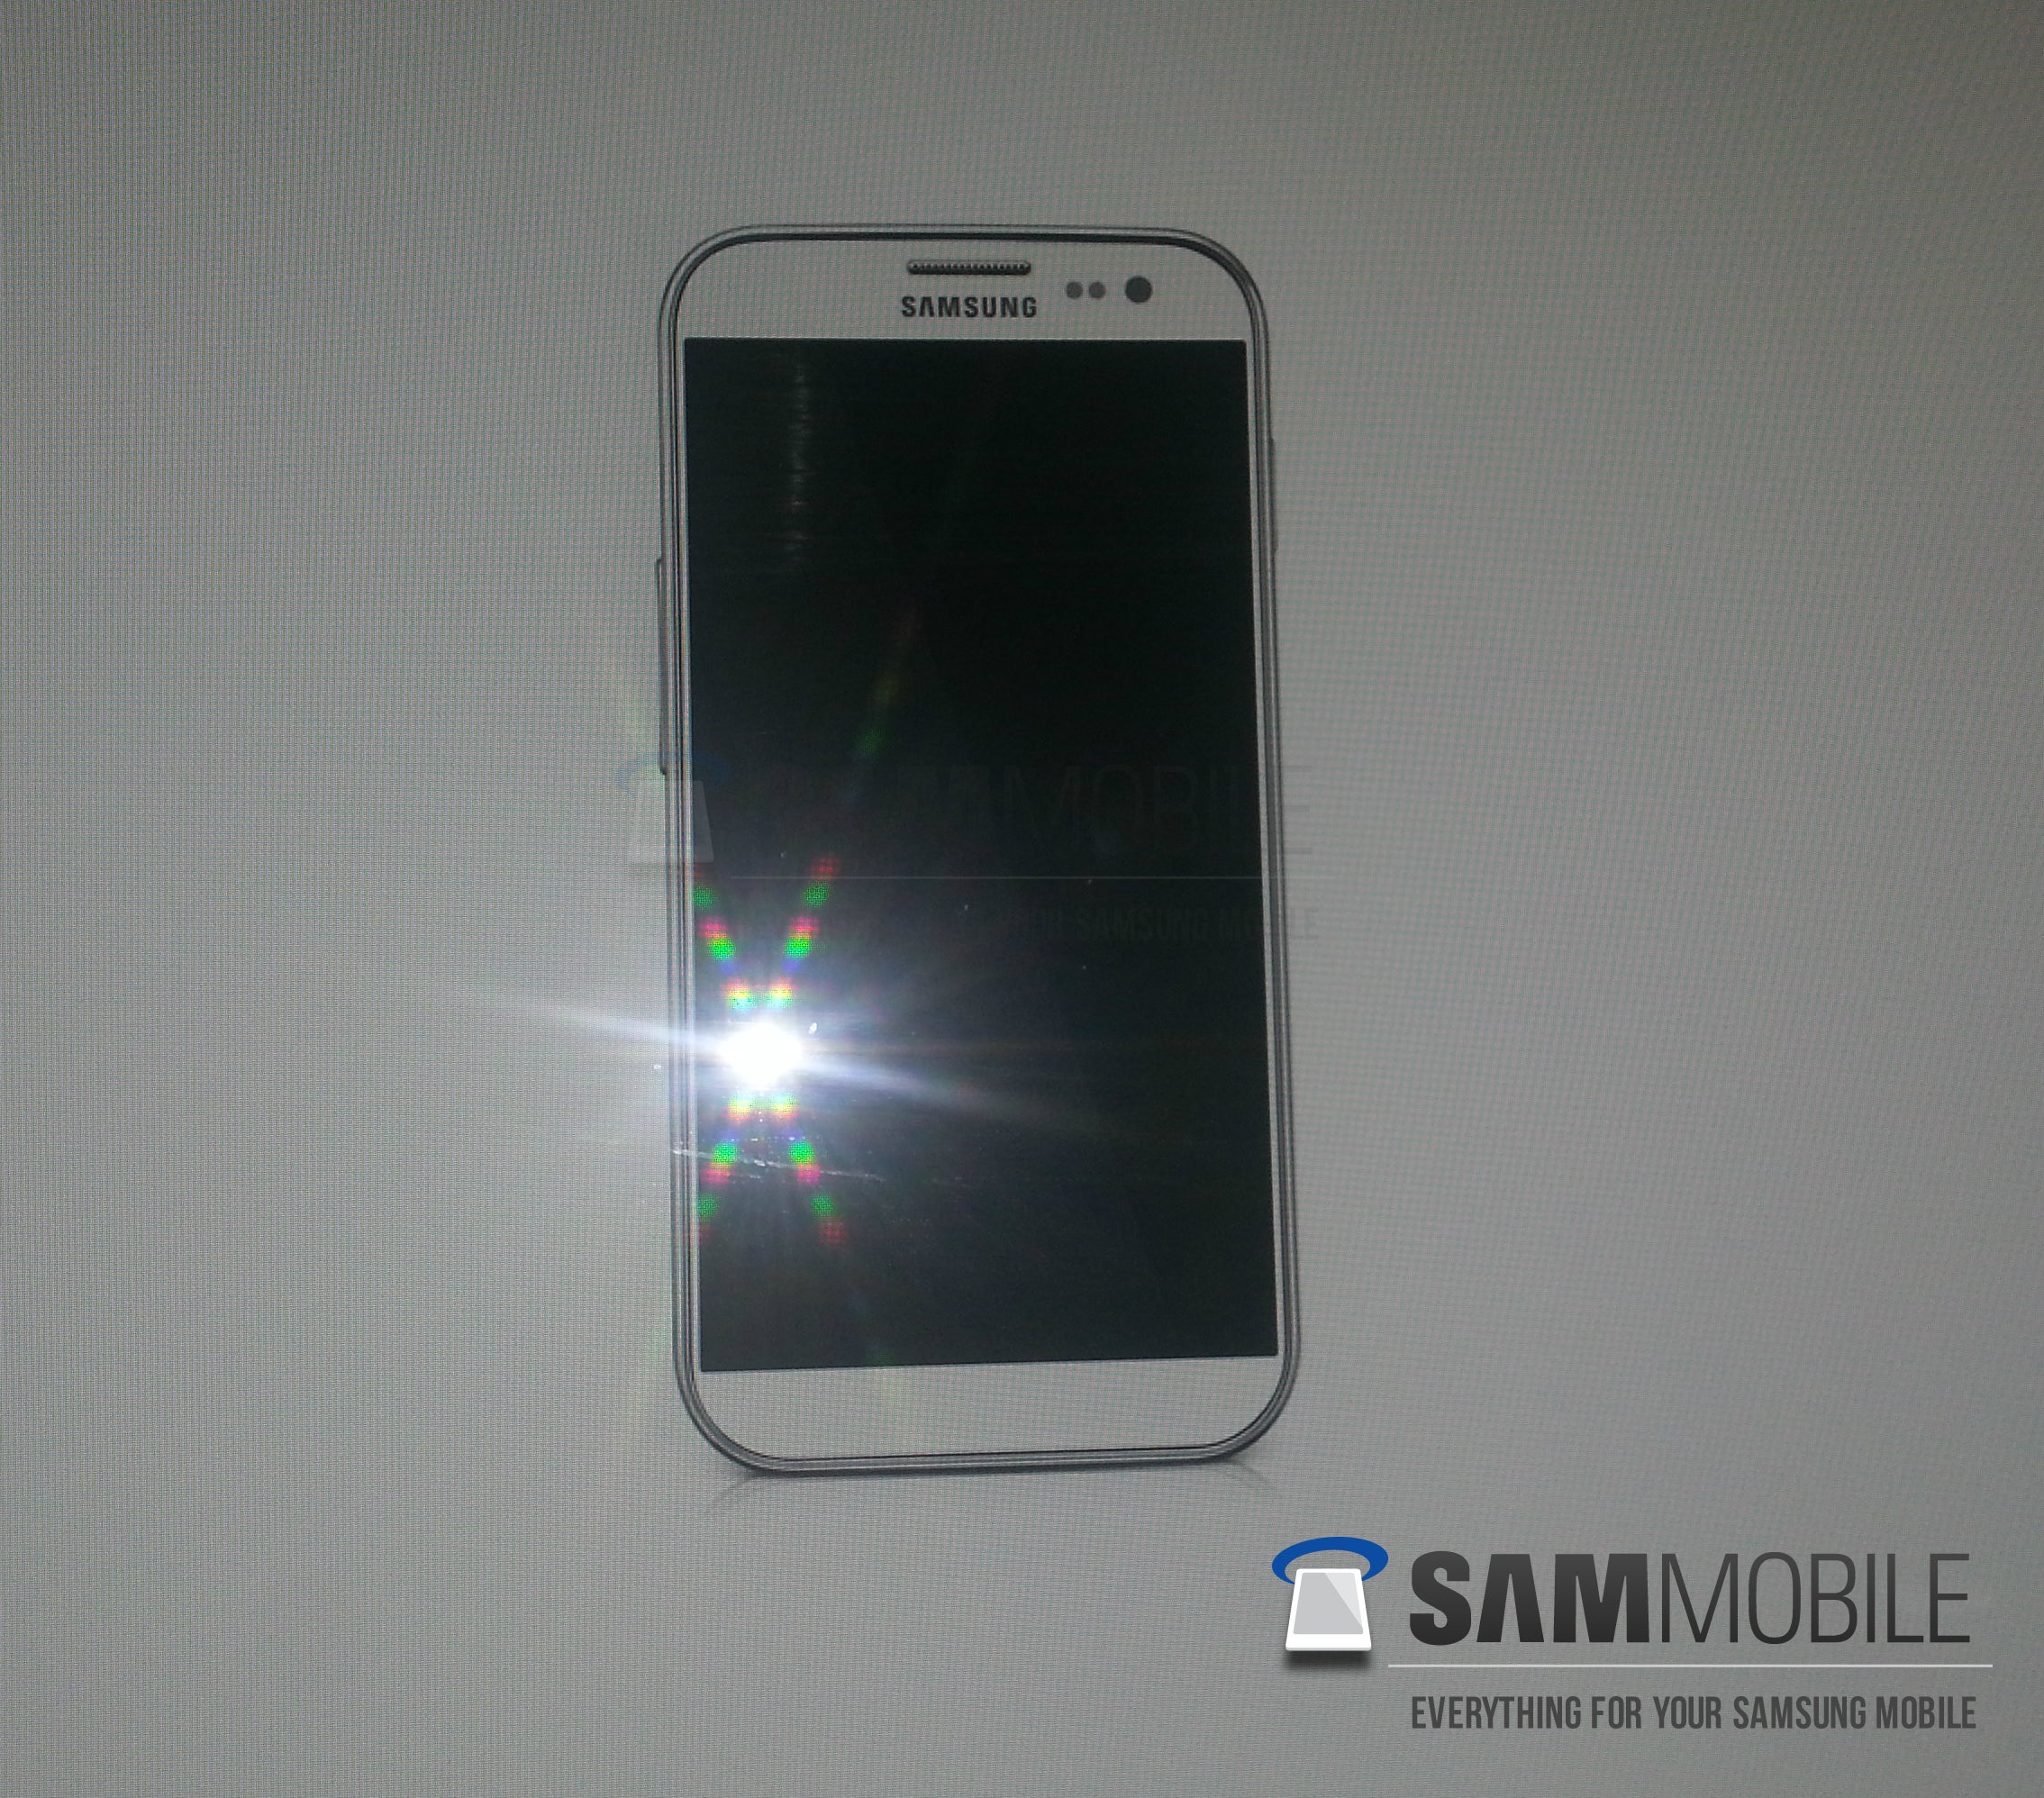 Is this the Samsung Galaxy S IV? - Image of Samsung Galaxy S IV leaks?